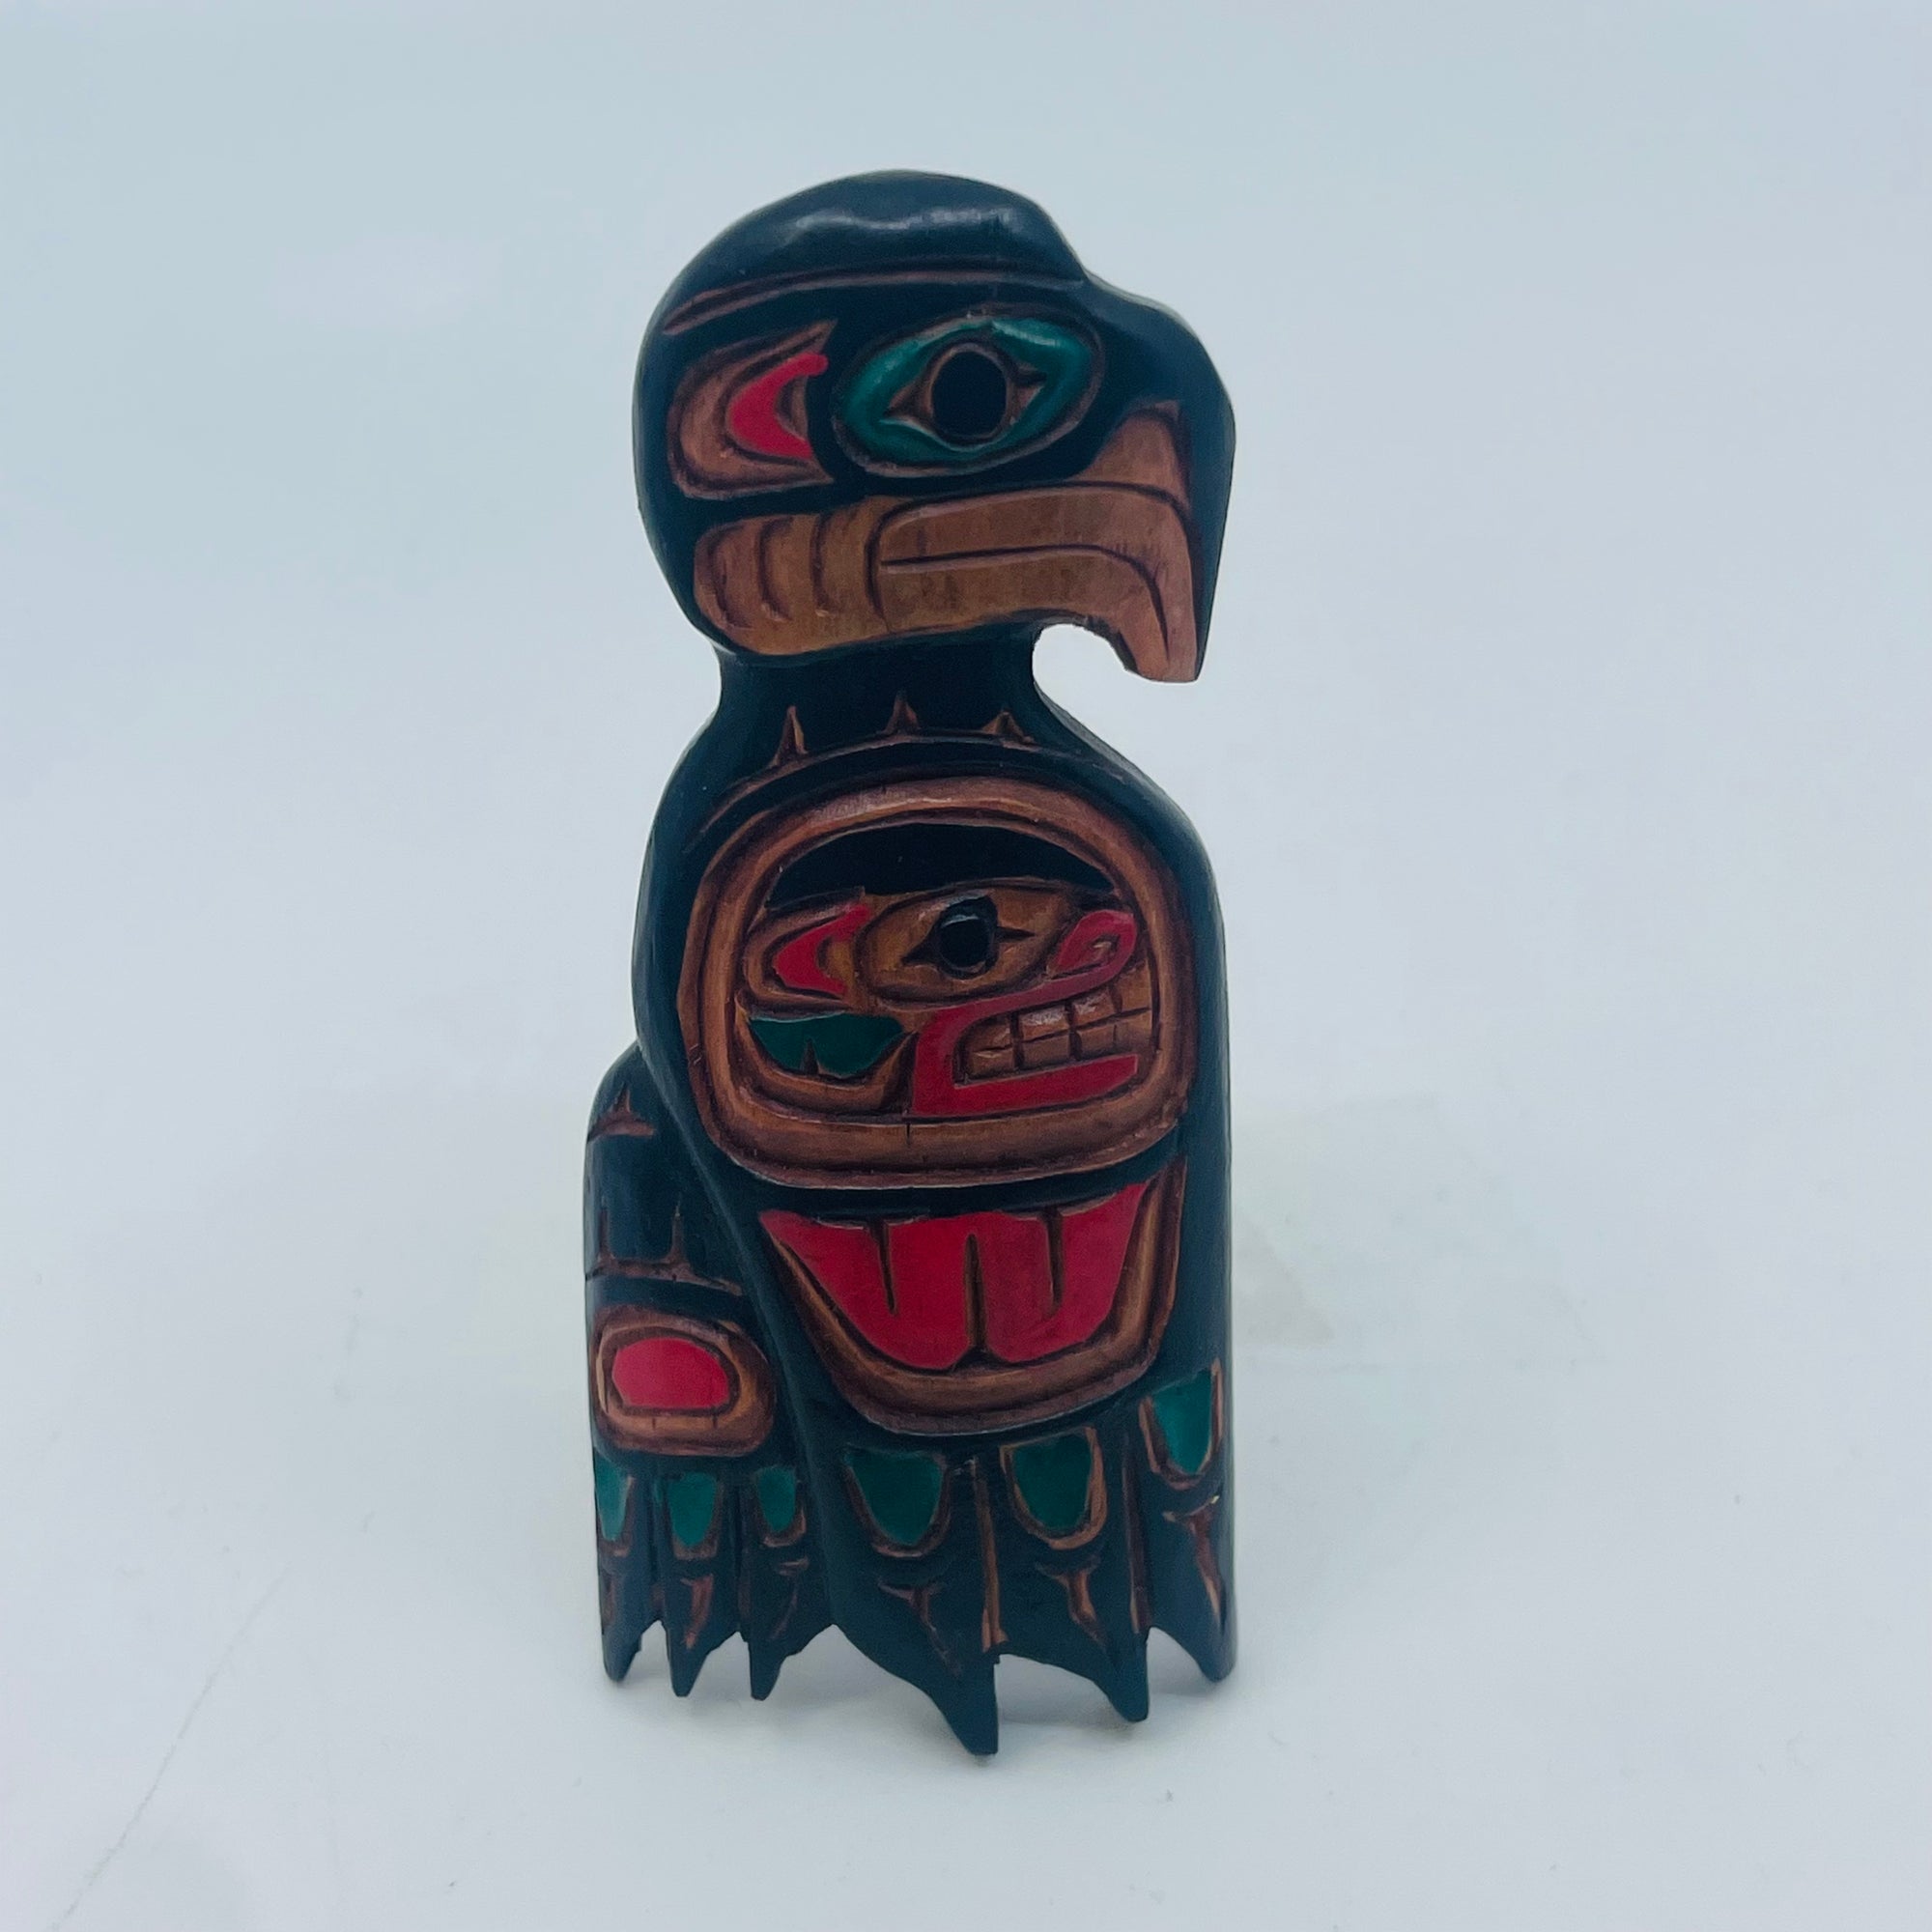 Artie George Magnets - Eagle V4 - WM-Magnets-26 - House of Himwitsa Native Art Gallery and Gifts